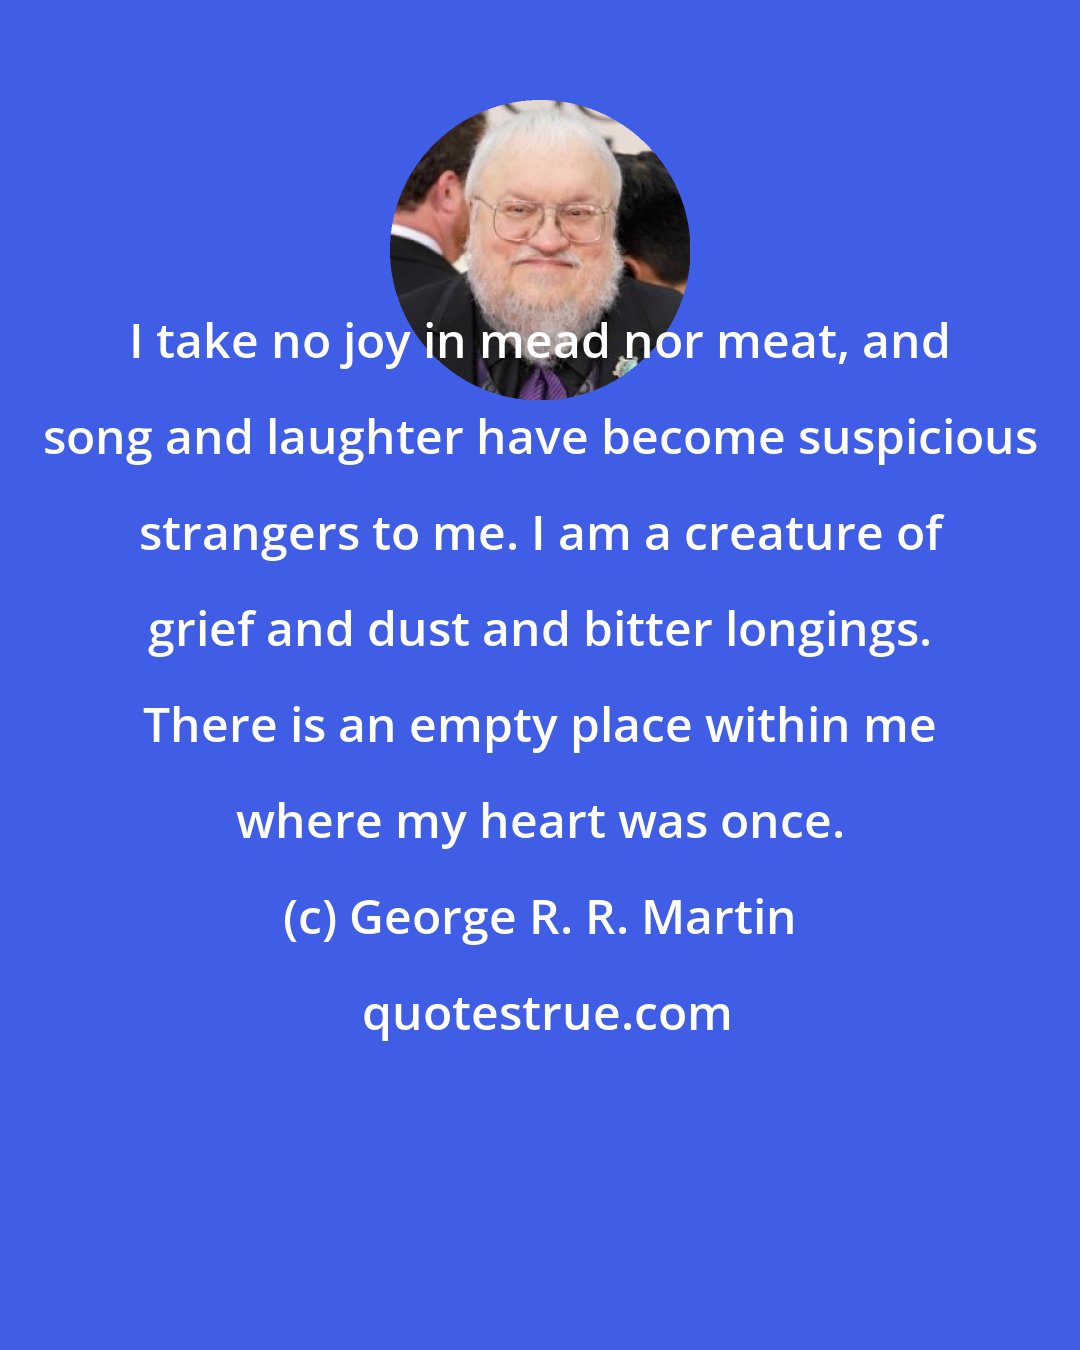 George R. R. Martin: I take no joy in mead nor meat, and song and laughter have become suspicious strangers to me. I am a creature of grief and dust and bitter longings. There is an empty place within me where my heart was once.